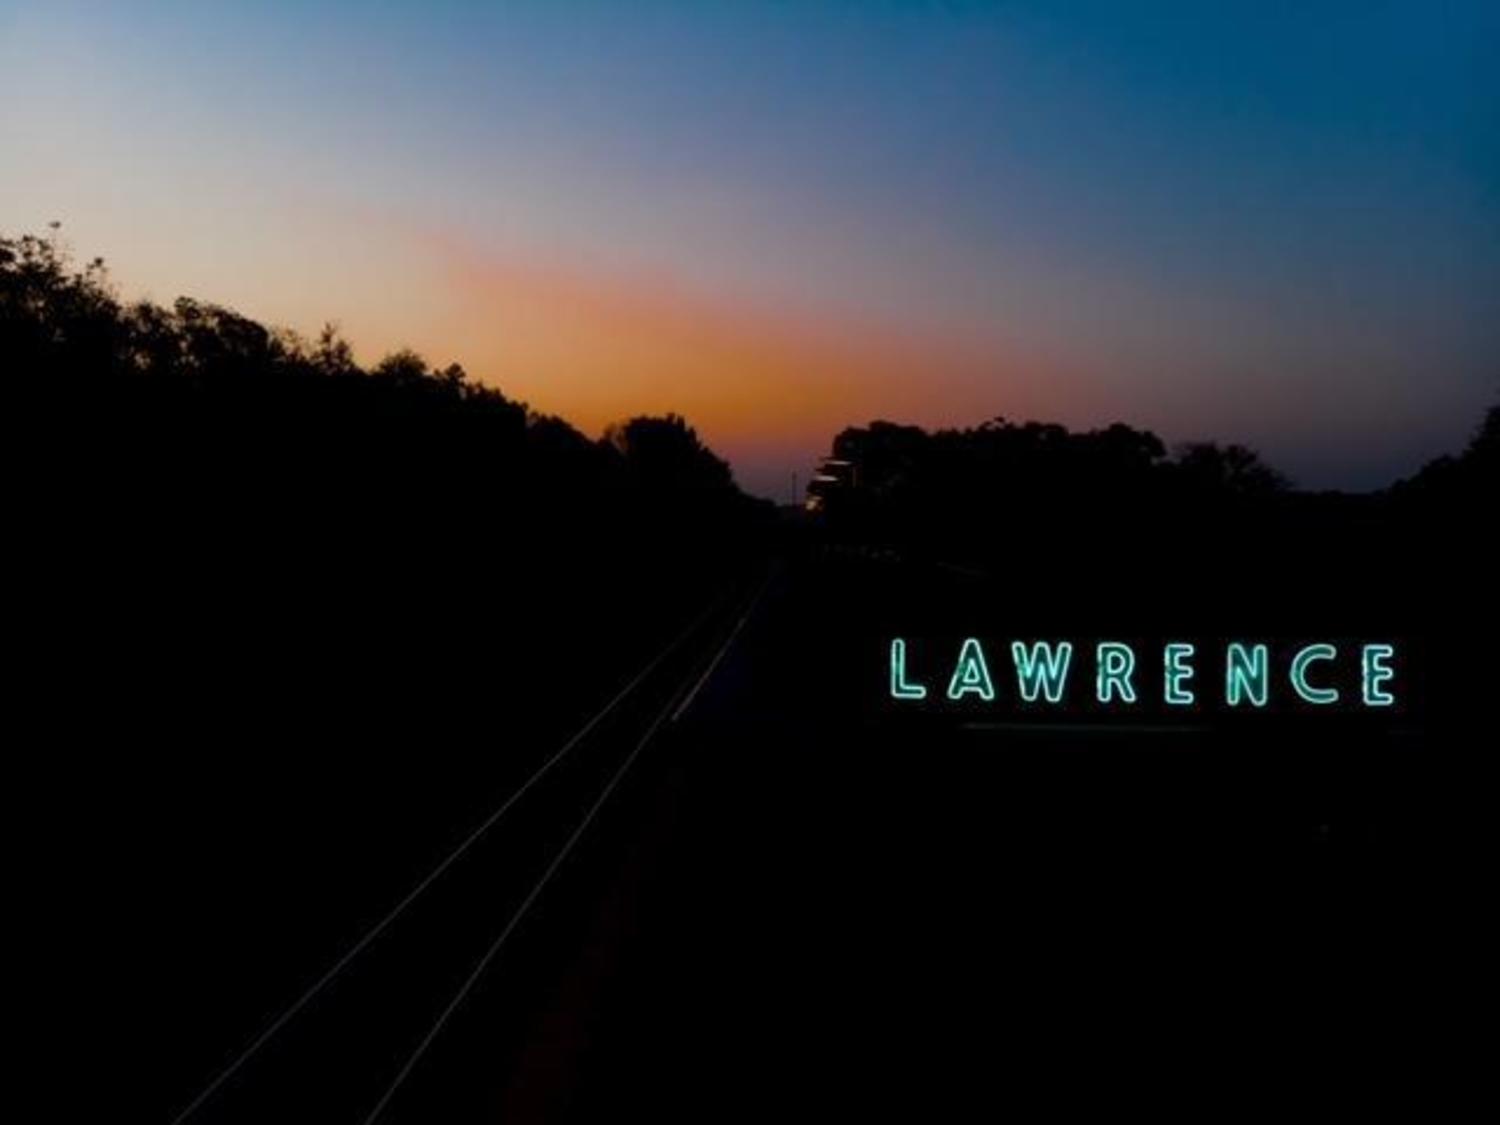 Drone Lawrence - Photograph - 18 x 24 - Lawrence Glow